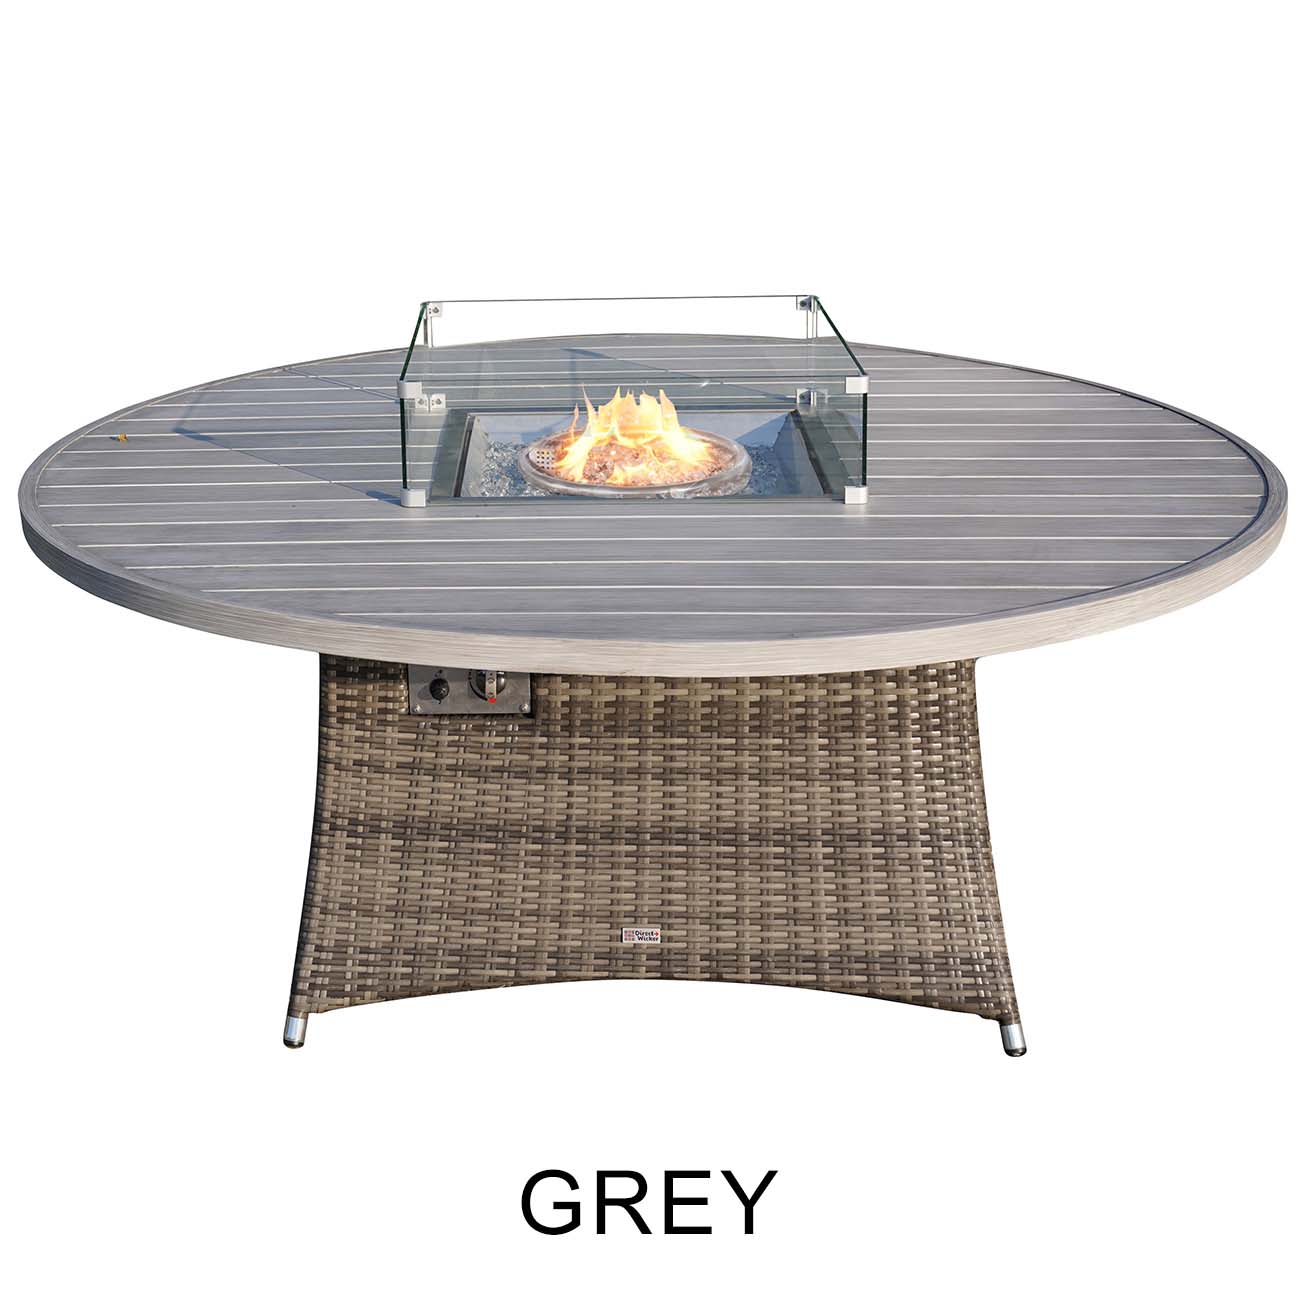 New Fashion Gas Fire Circular Table Patio 9 Pieces Seat Chairs and Cushions by Abrihome(BBQ Plate needs to be purchased separately)